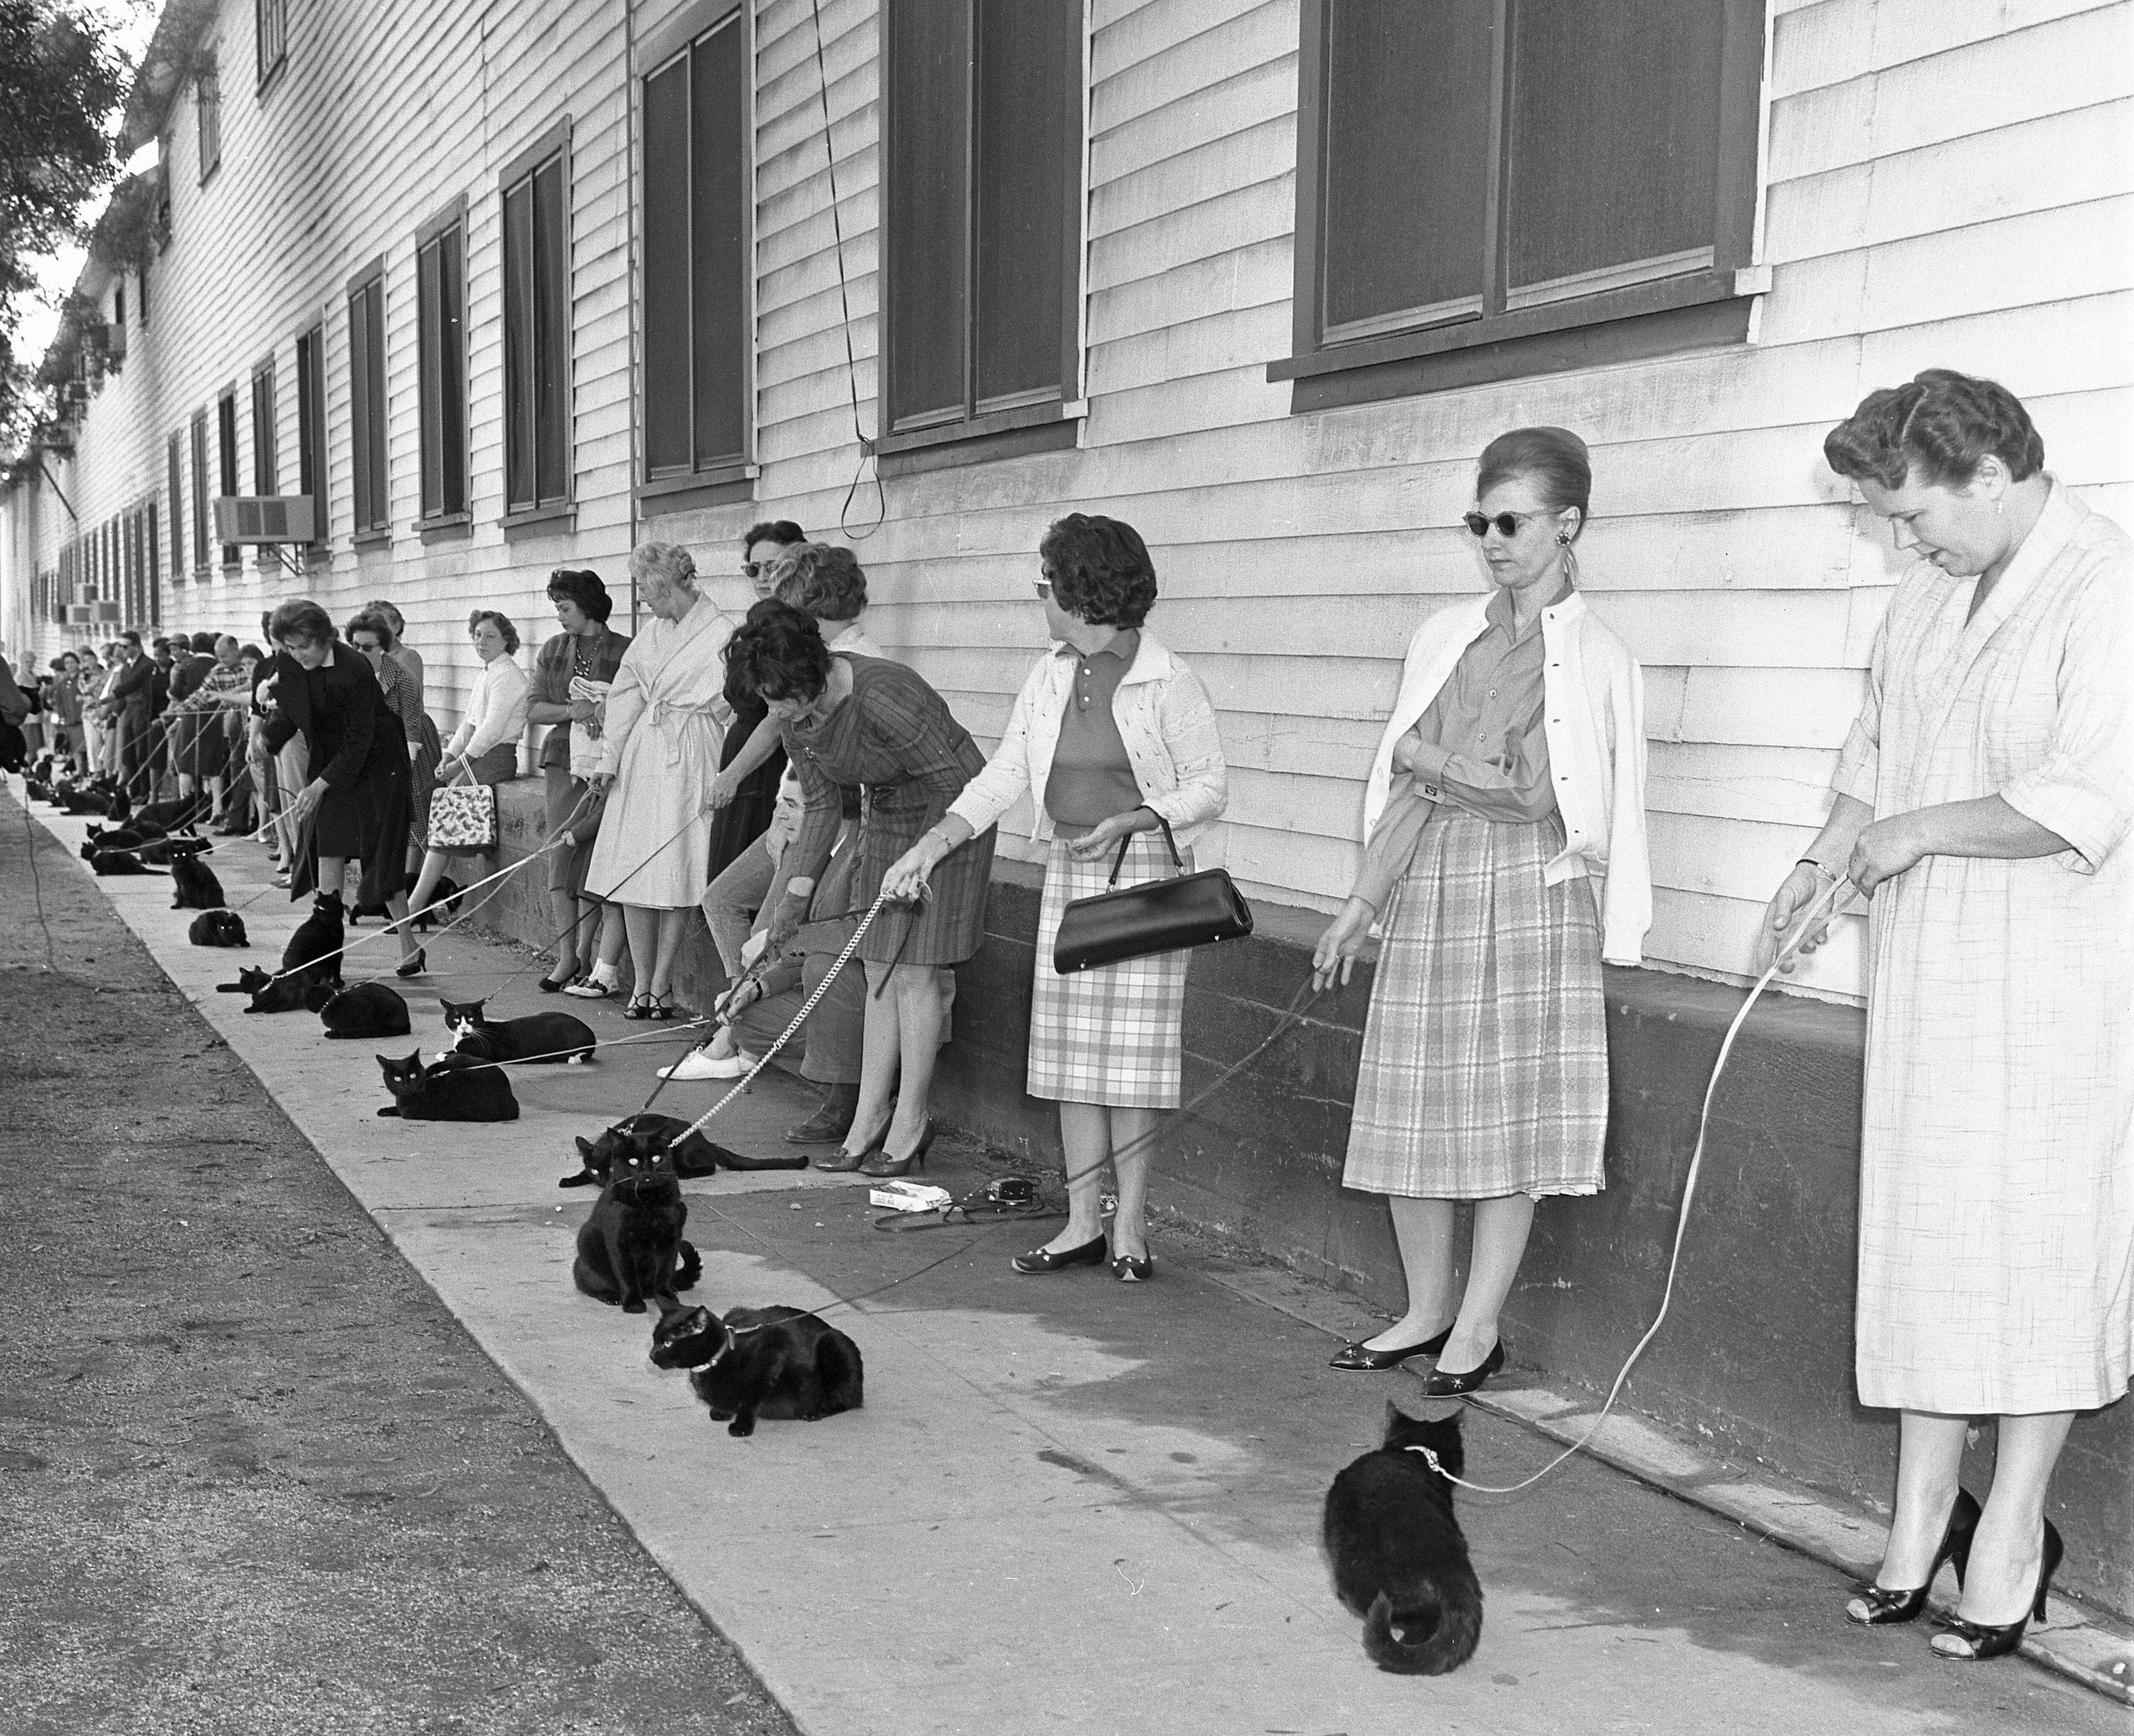 Women standing with black cats on leashes